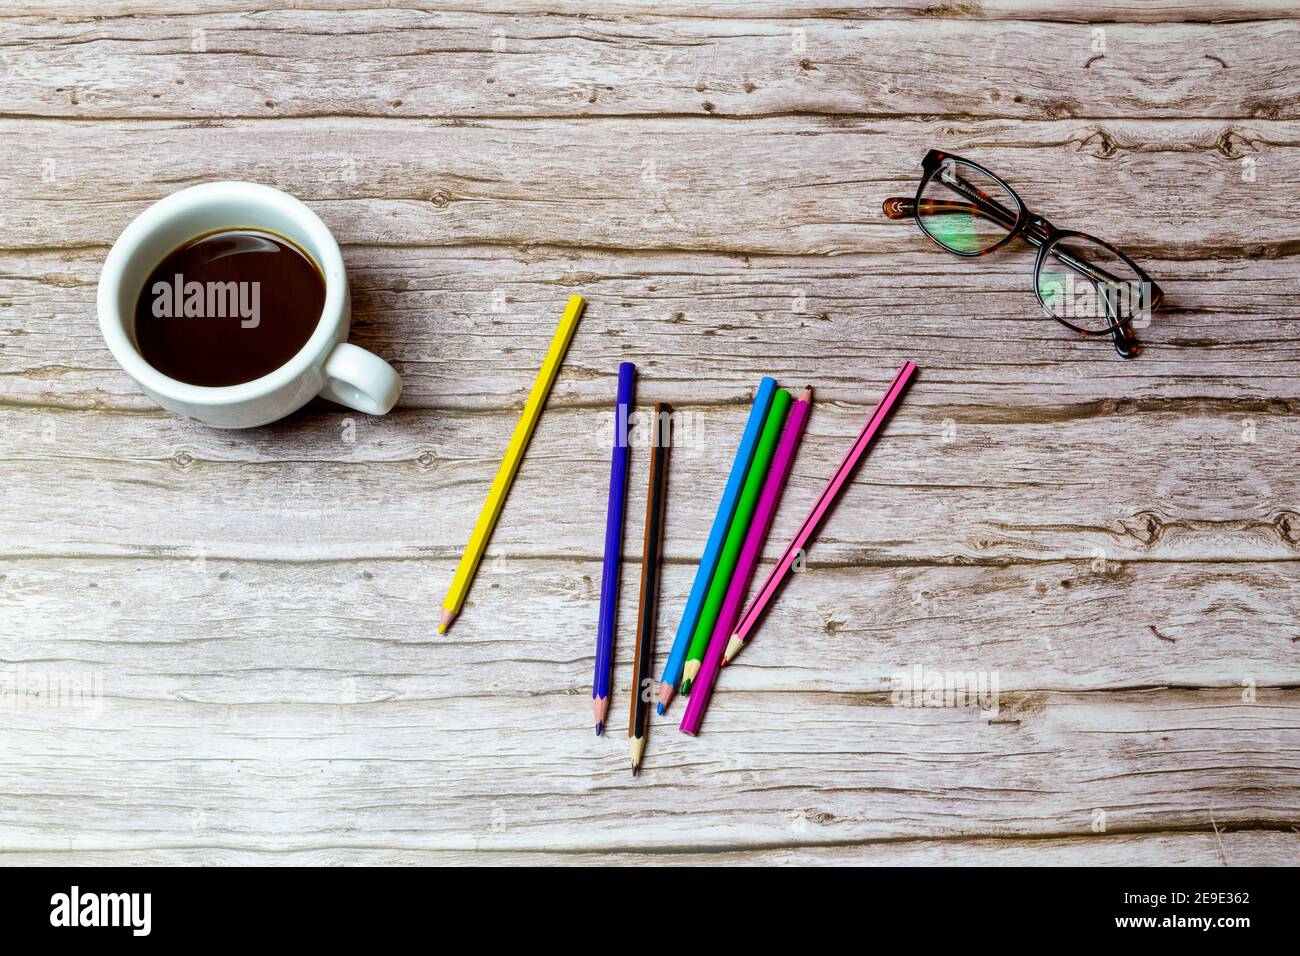 Various colour colouring pencils on a wooden desk or table next to a coffee and glasses Stock Photo